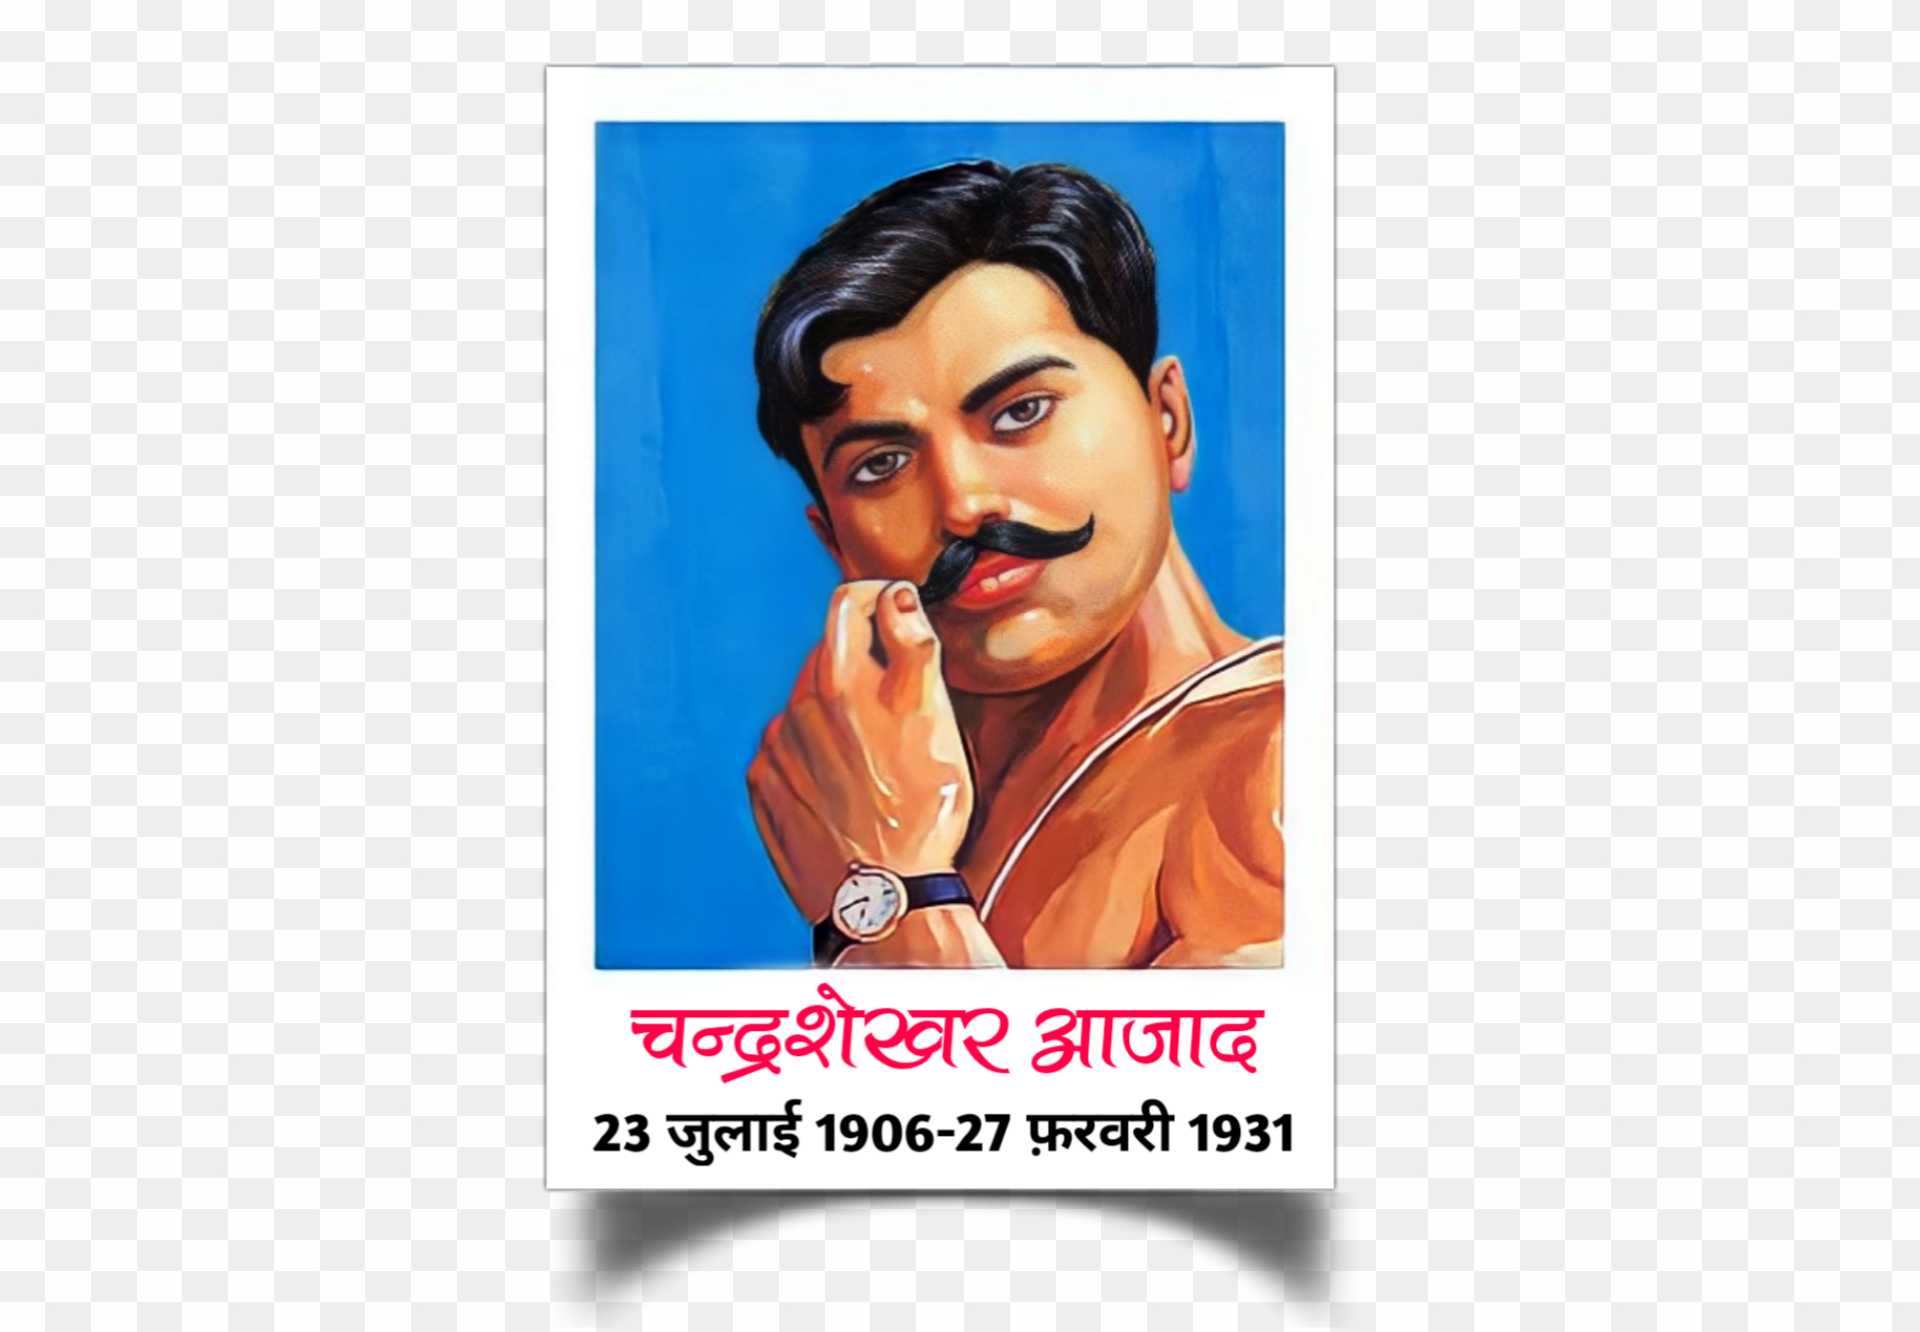 Chandra Shekhar Azad Jayanti 2020 Images & HD Wallpapers for Free Download  Online: WhatsApp Messages And Facebook Photos to Share on Legendary Freedom  Fighter's 114th Birth Anniversary | 🙏🏻 LatestLY